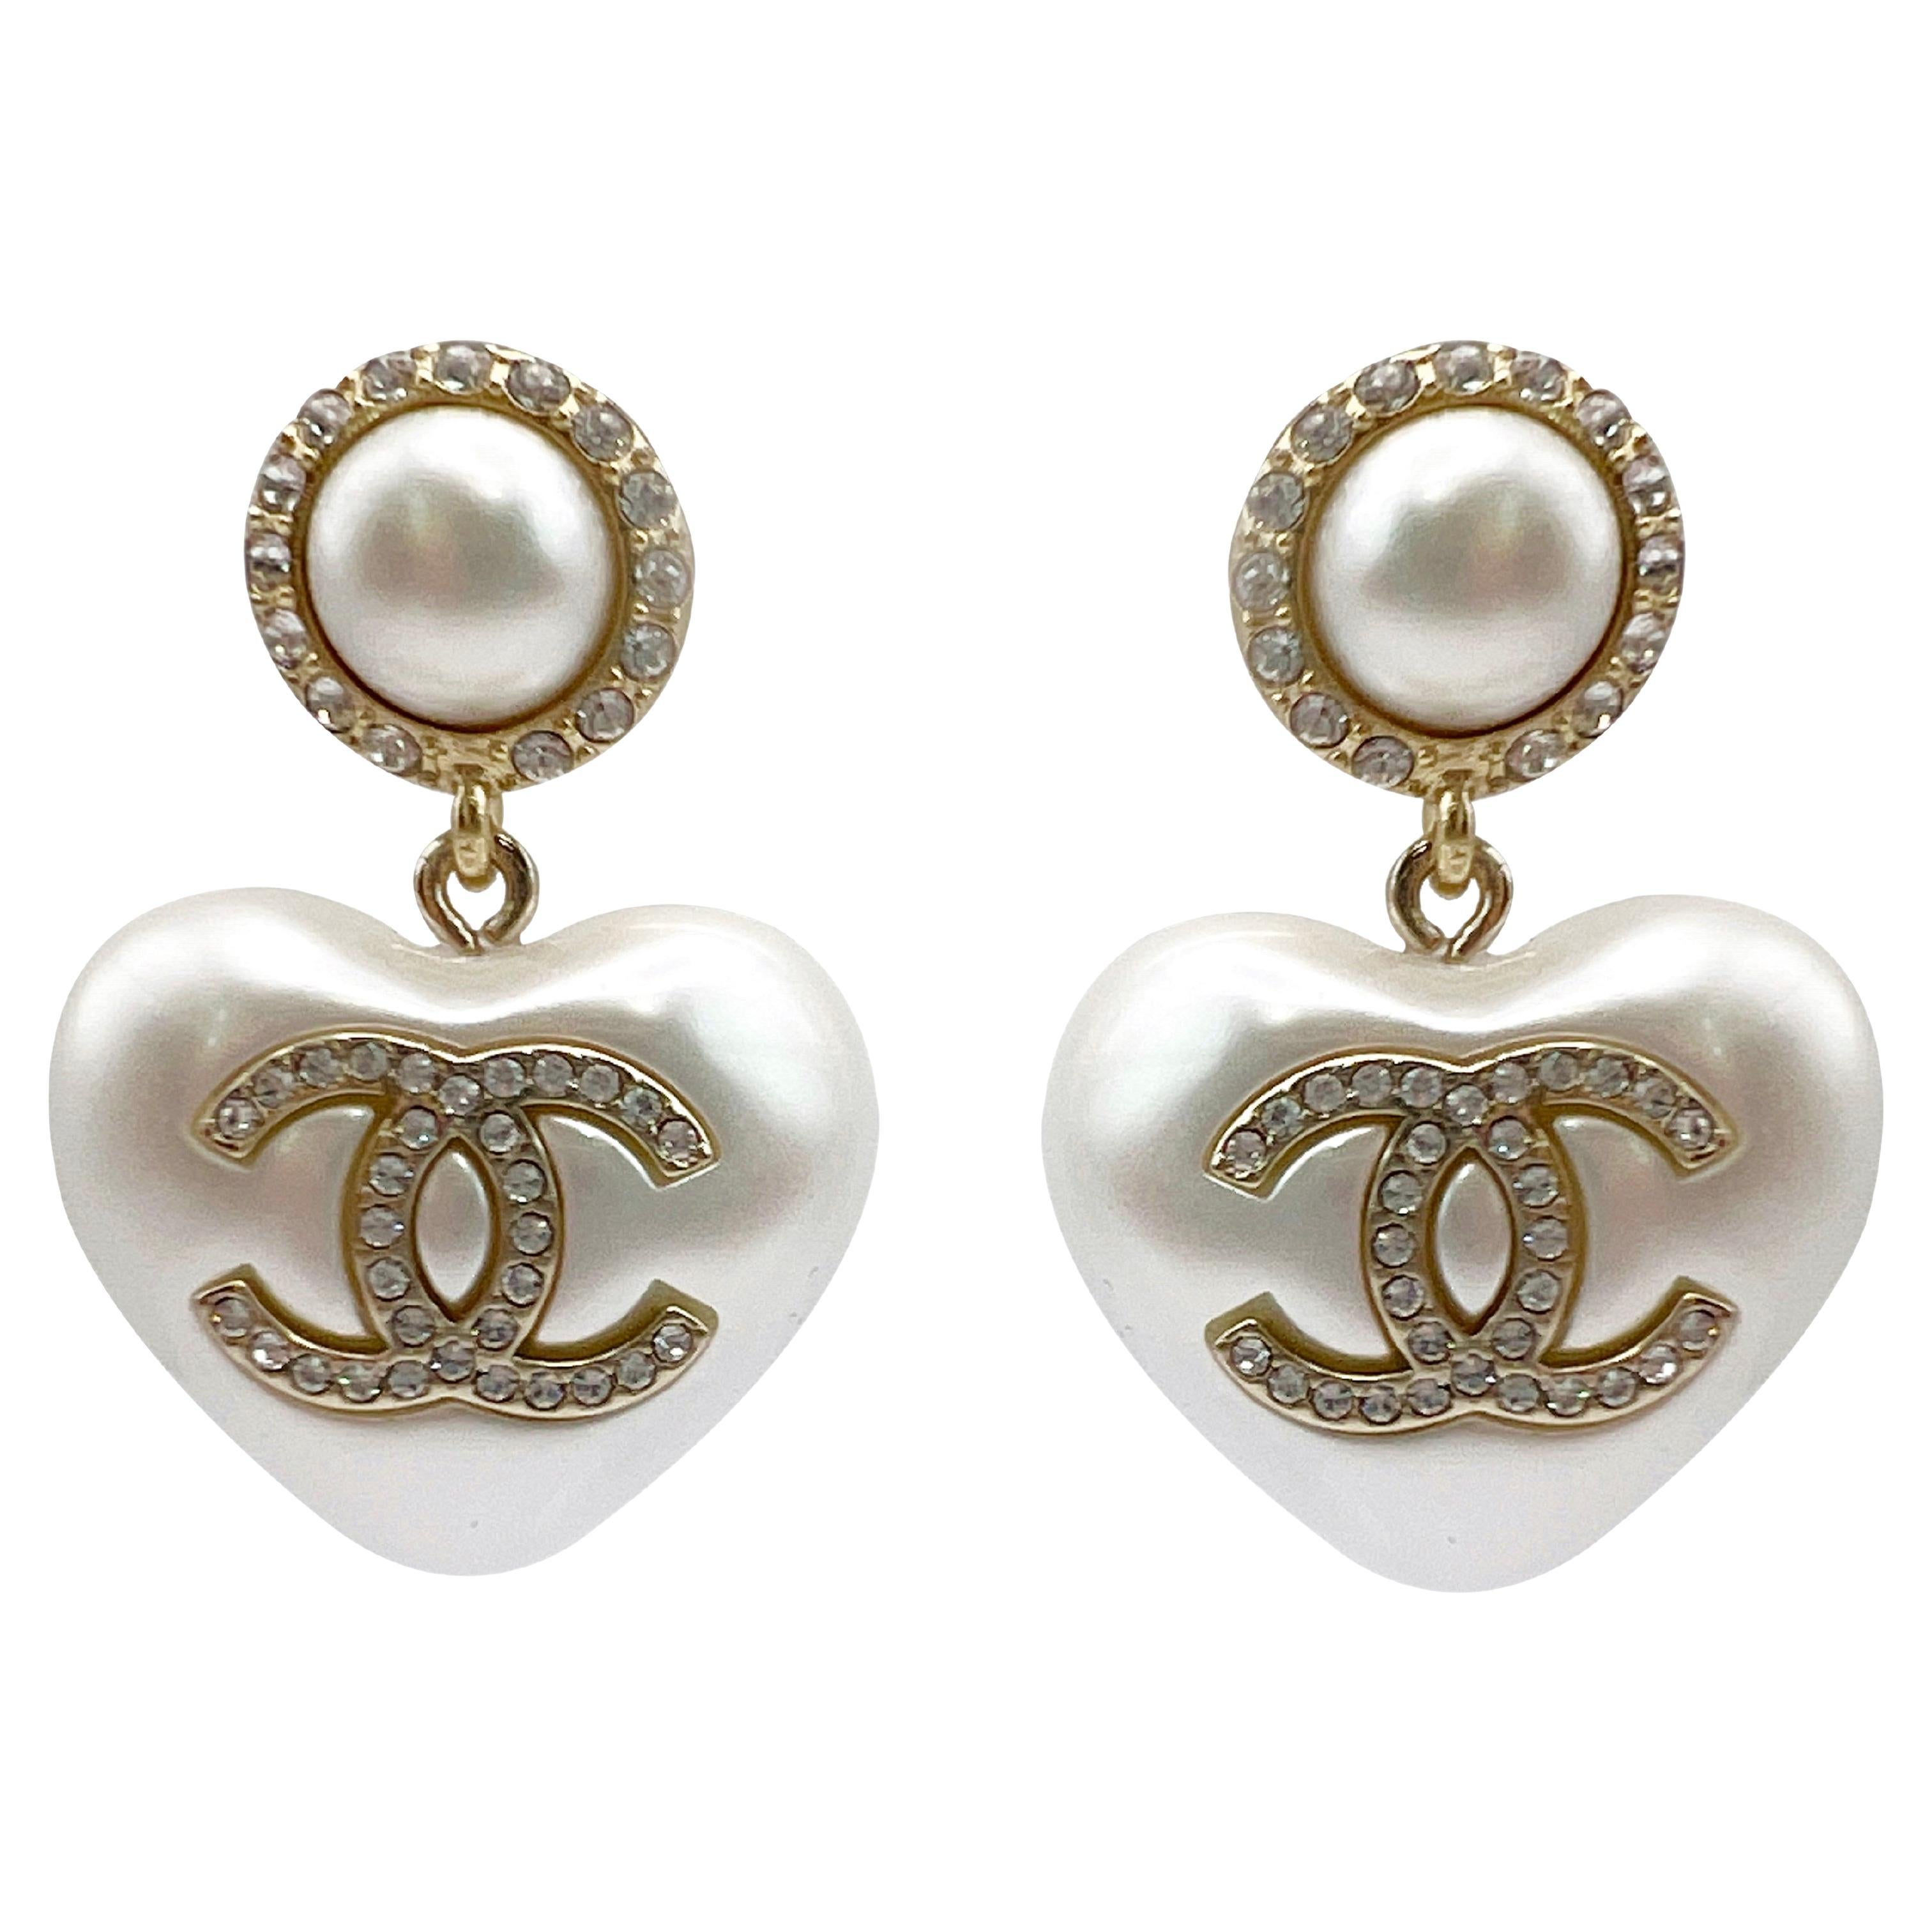 Chanel Vintage 1980s White Pearl 18K Gold-Plated Chain Clip on Earrings